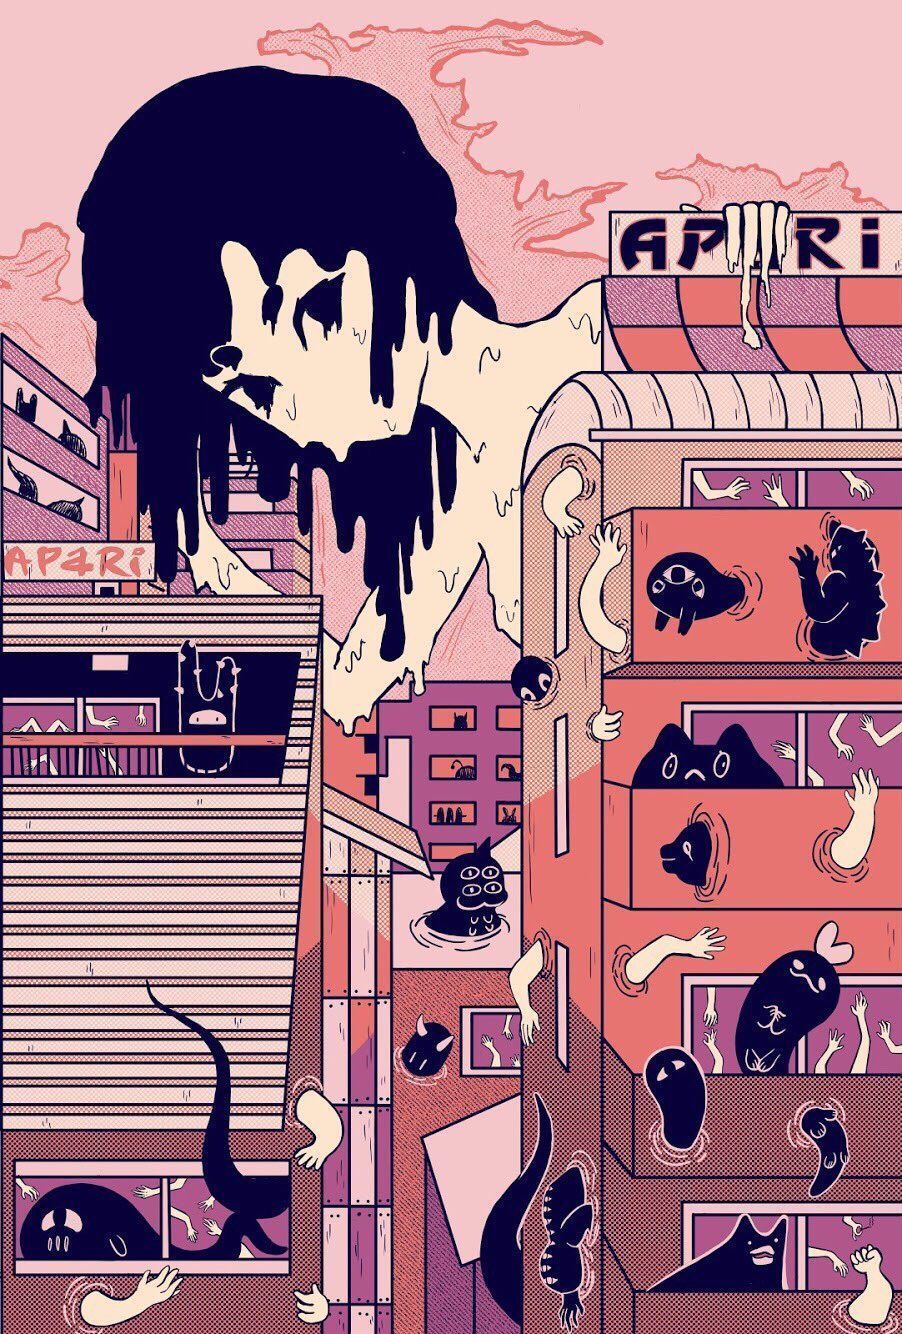 Aesthetic Anime Phone Wallpapers - Wallpaper Cave.